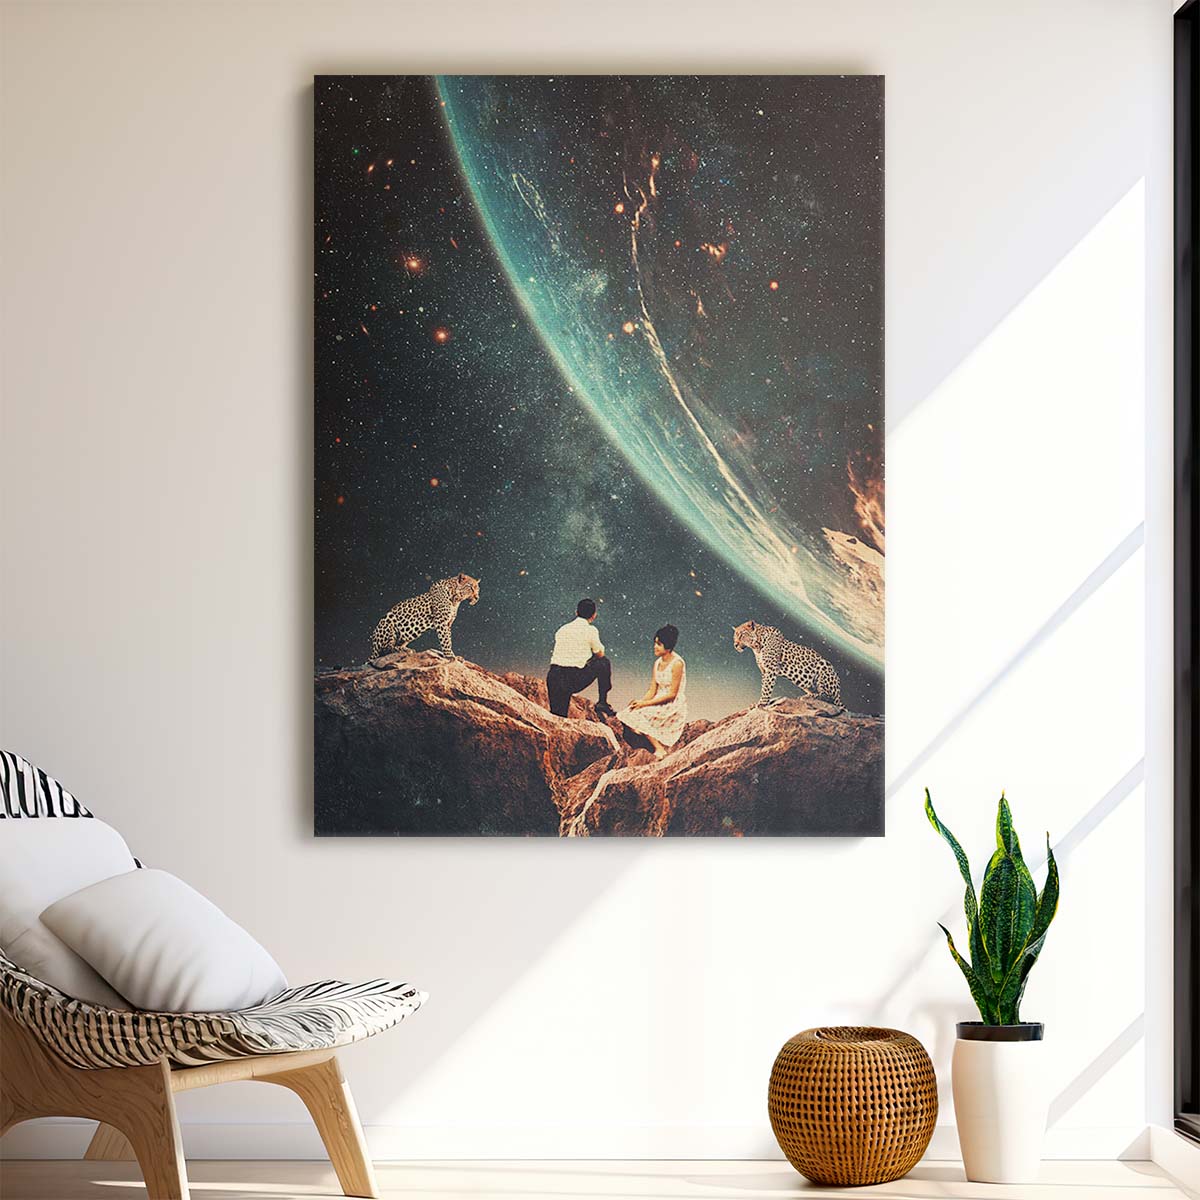 Romantic Retrofuturism Space Illustration Art by Frank Moth by Luxuriance Designs, made in USA